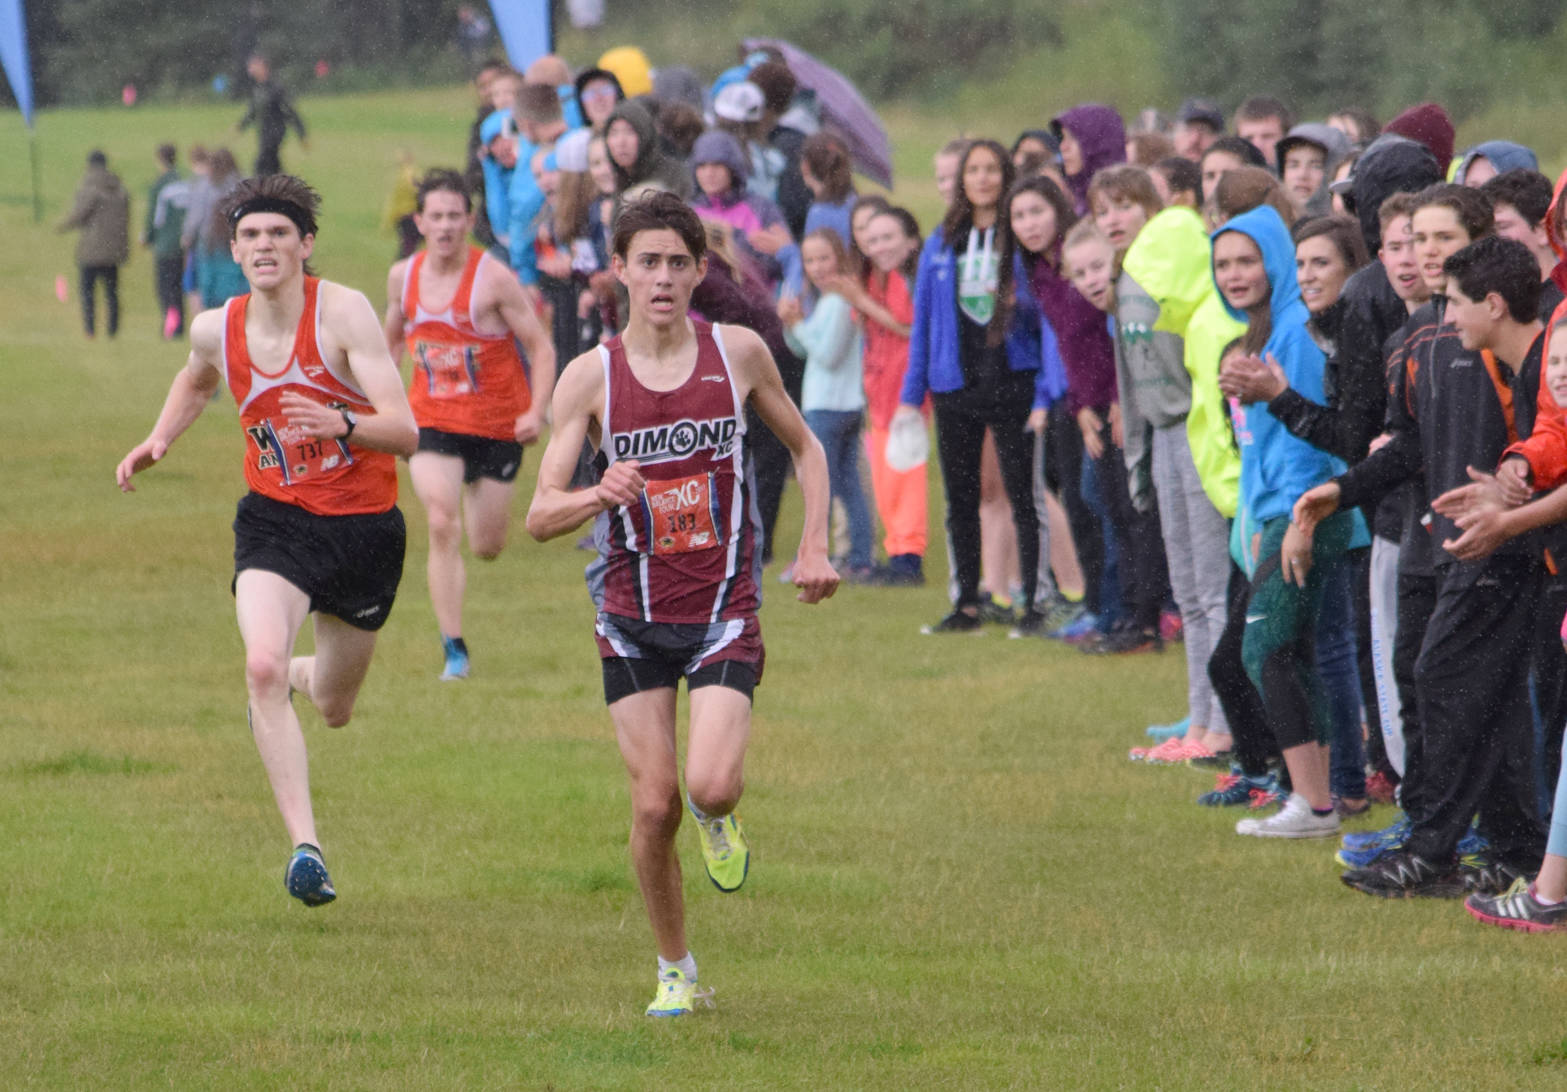 West’s Declan Dammeyer and Ethan Davis fail to catch Dimond’s Santiago Prosser in the final steps of the boys race Saturday, Aug. 19, 2017, at the Tsalteshi Invitational. (Photo by Jeff Helminiak/Peninsula Clarion)